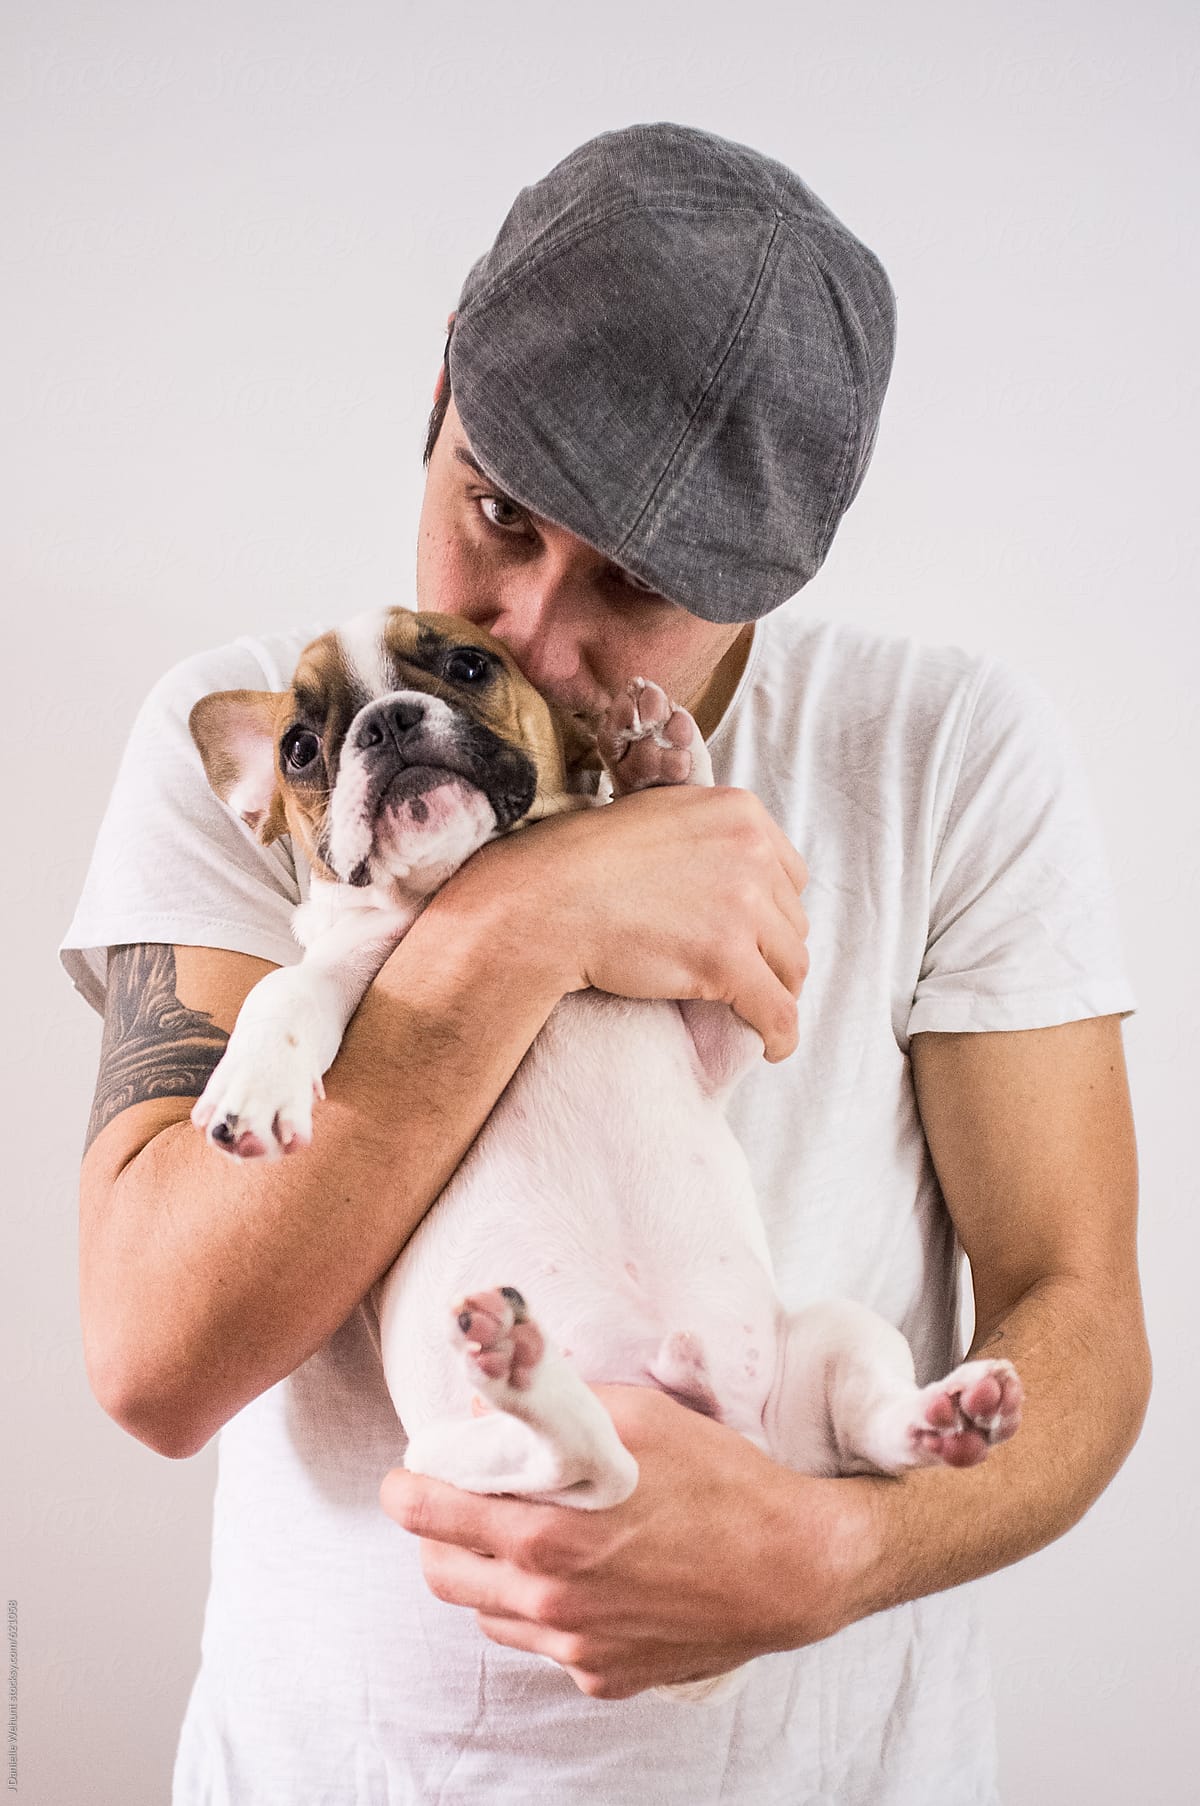 A handsome caucasian man in a hat holding and kissing a french bulldog puppy.